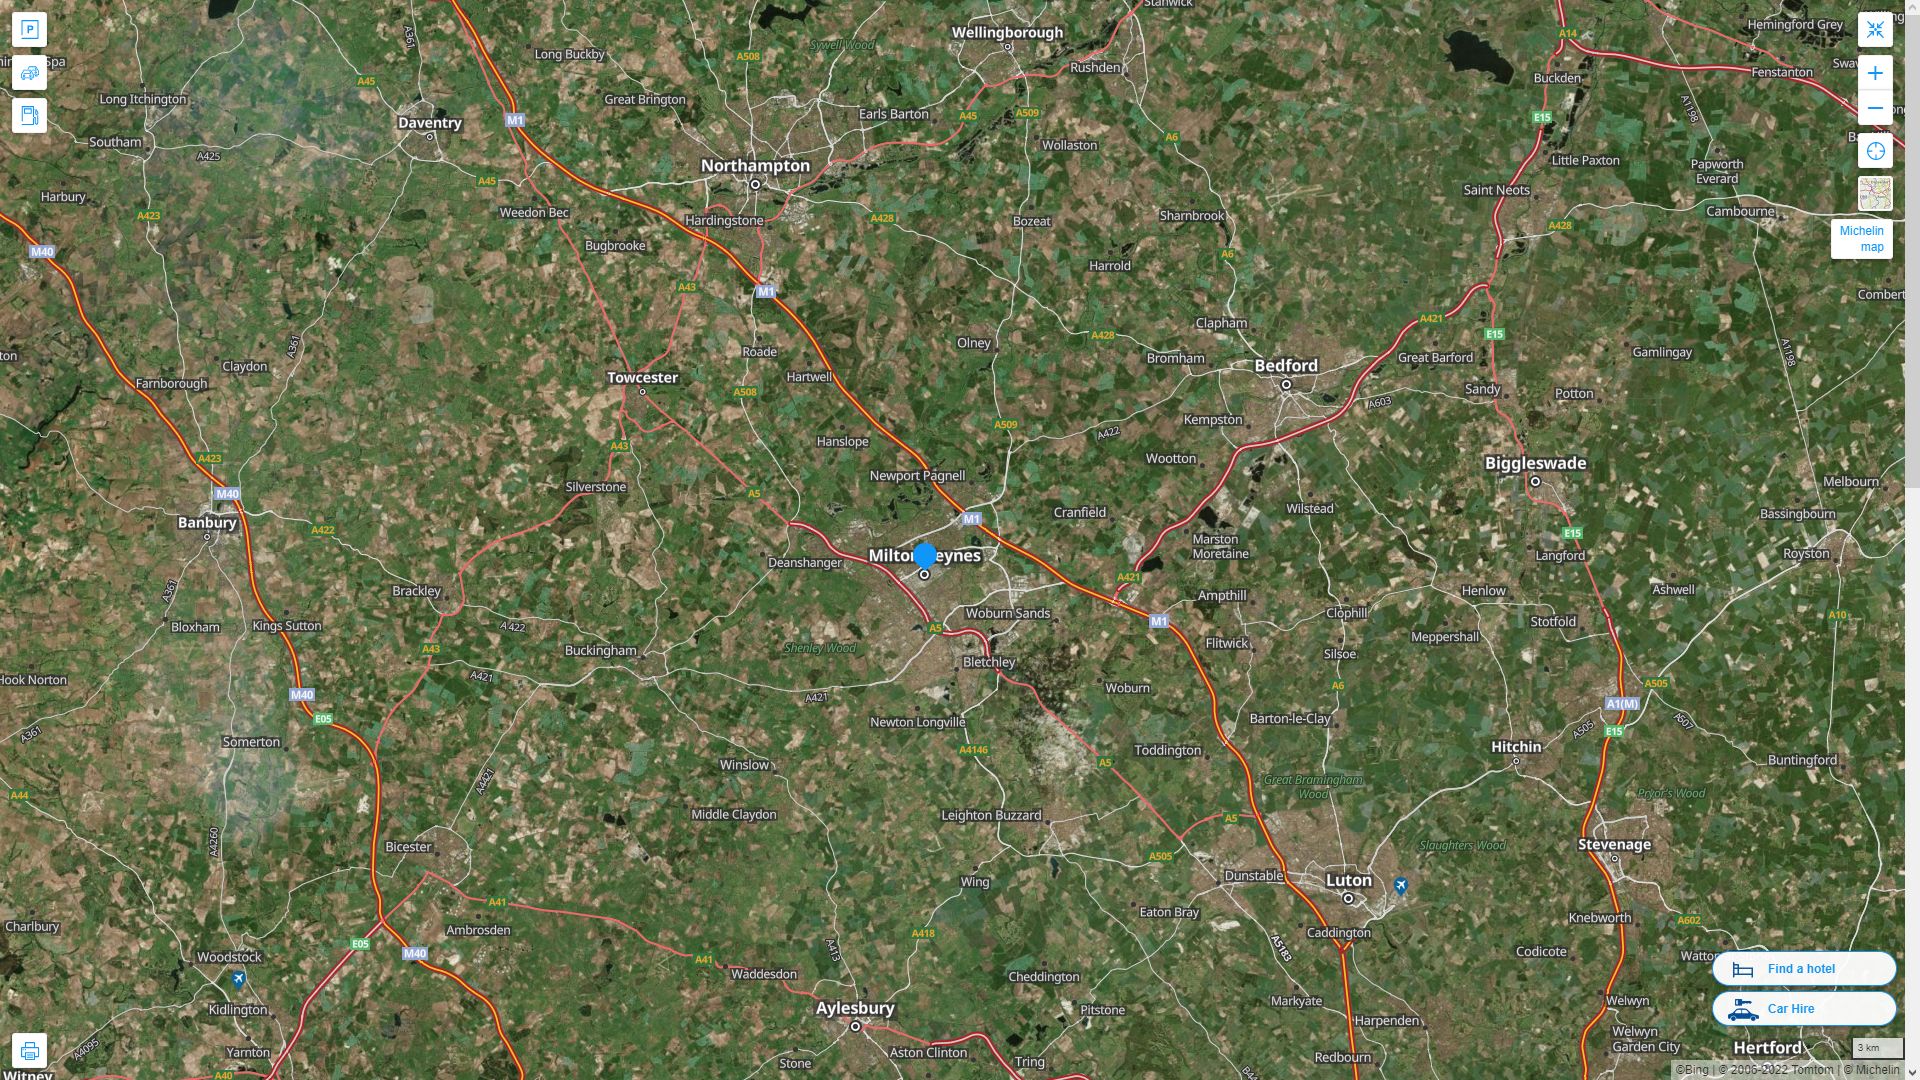 Milton Keynes Highway and Road Map with Satellite View